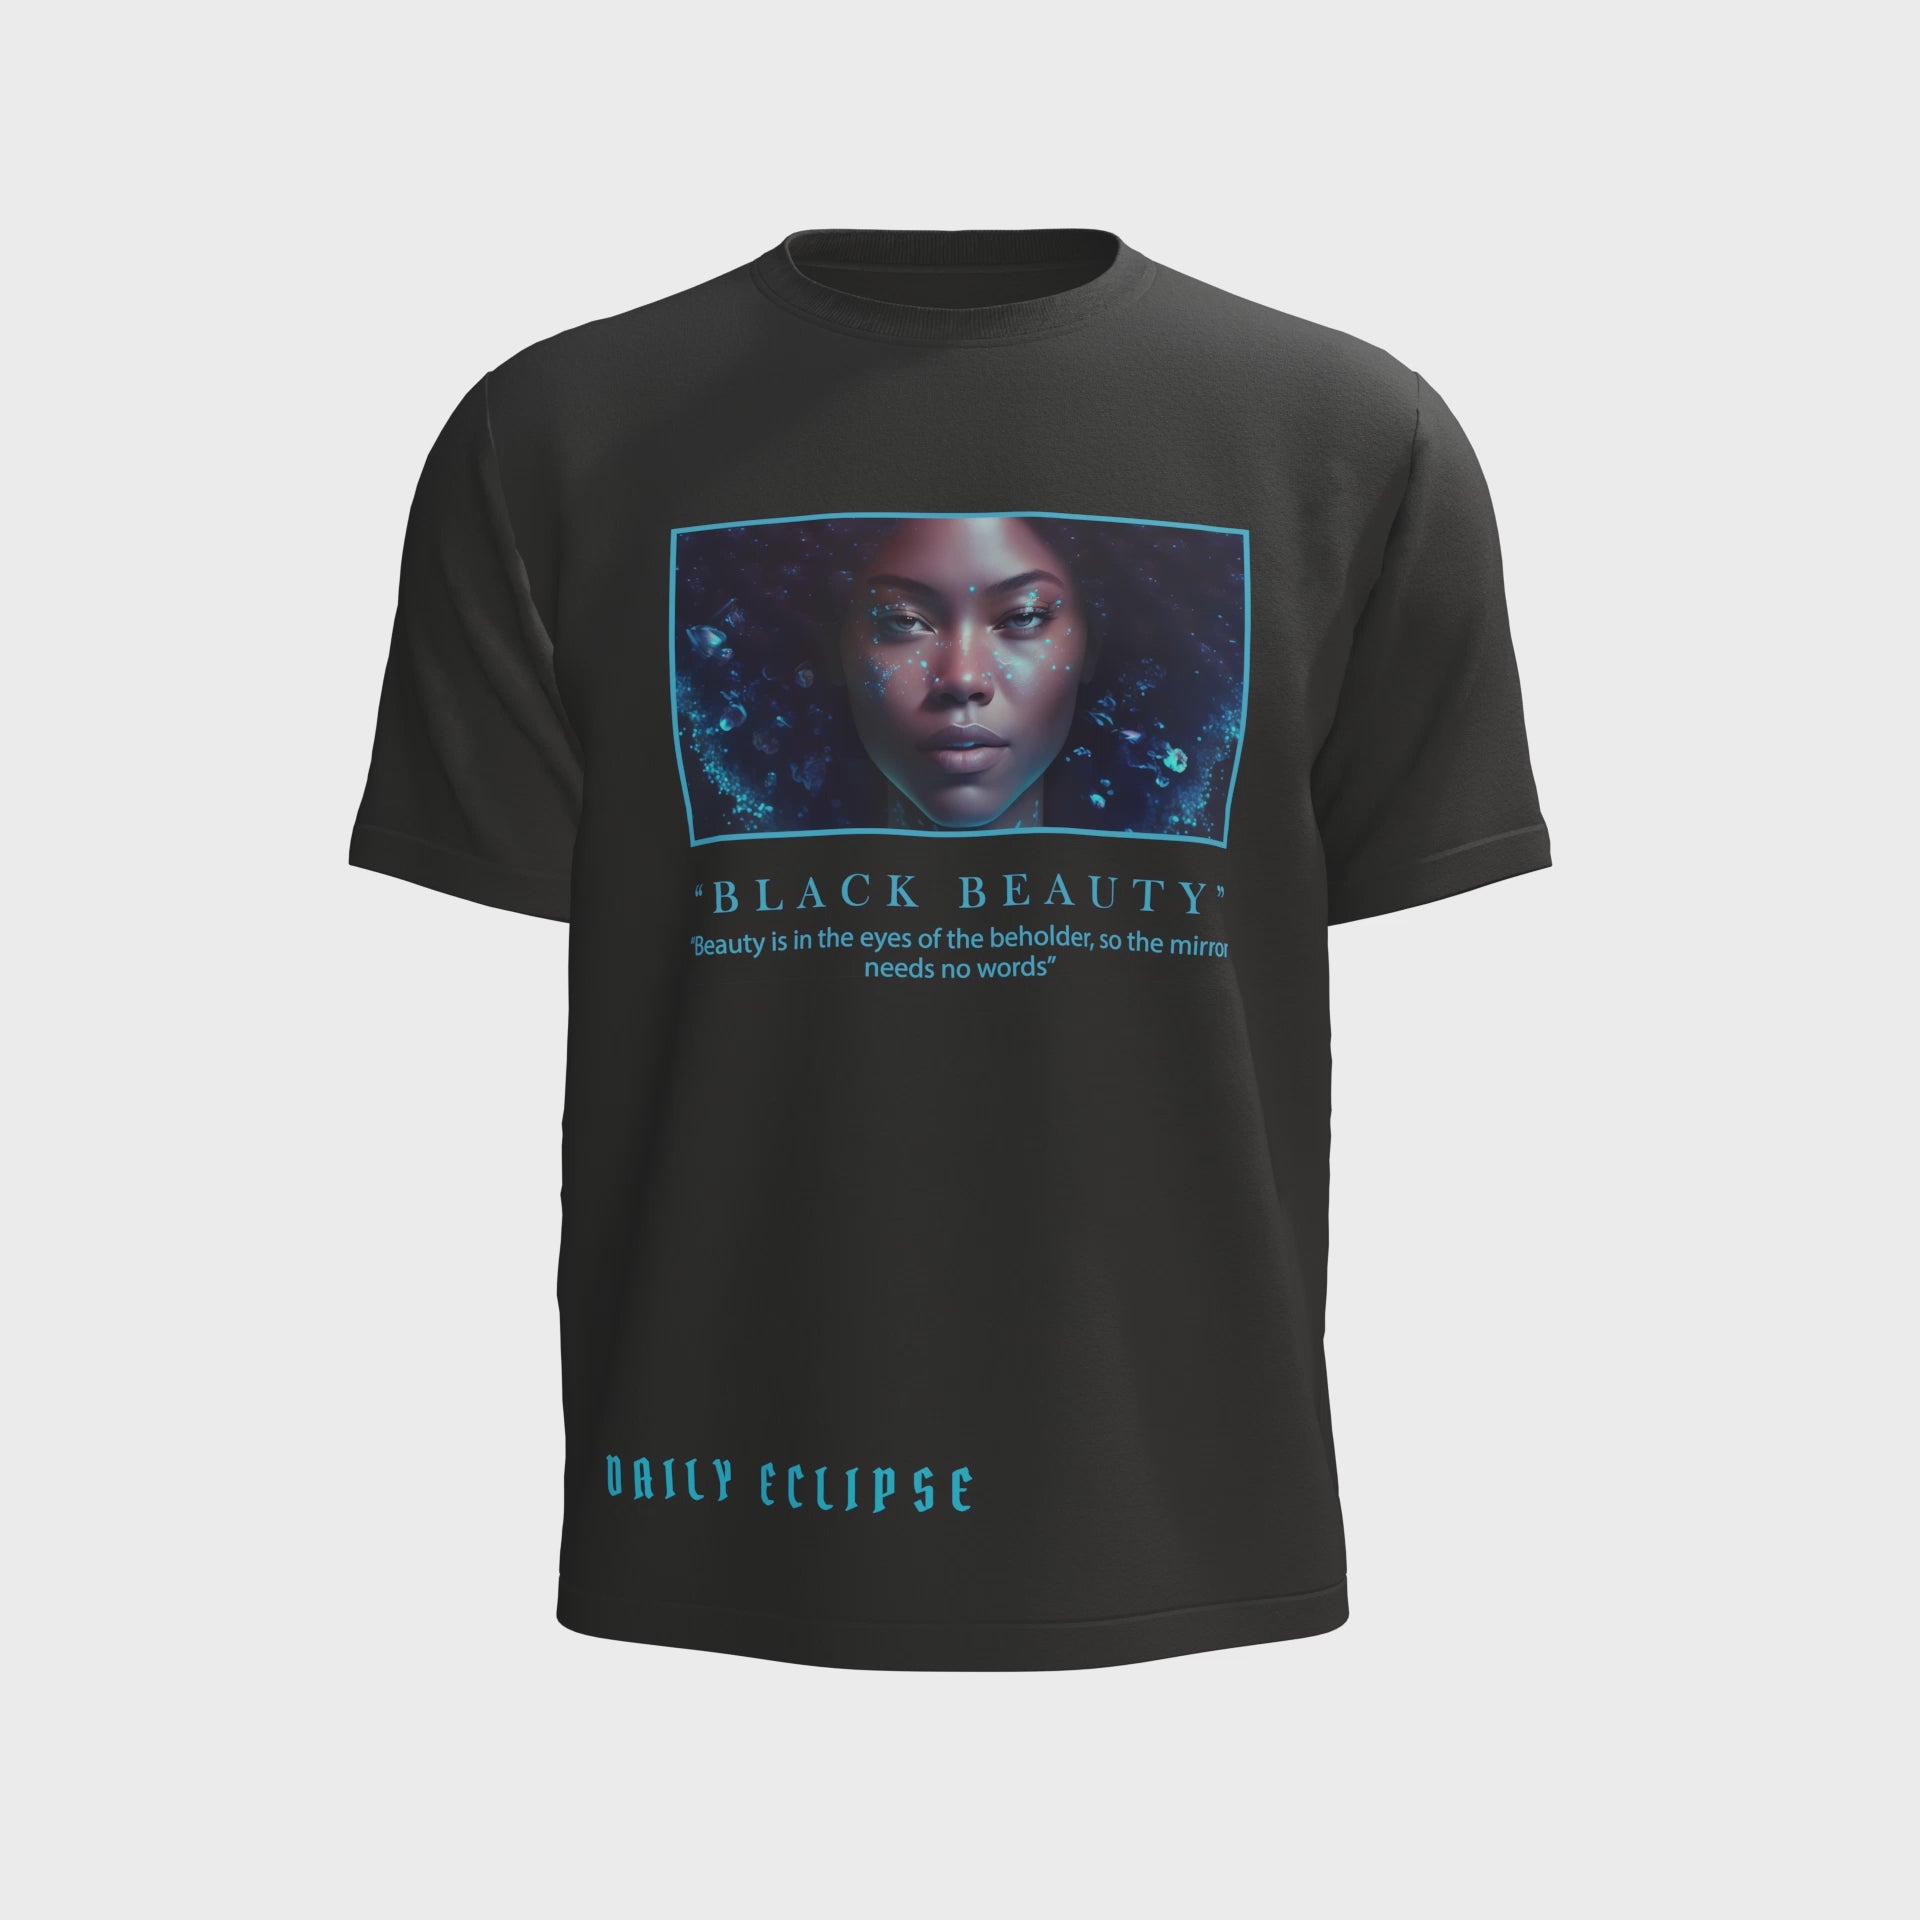 Black Beauty tshirt, crafted from 100% cotton